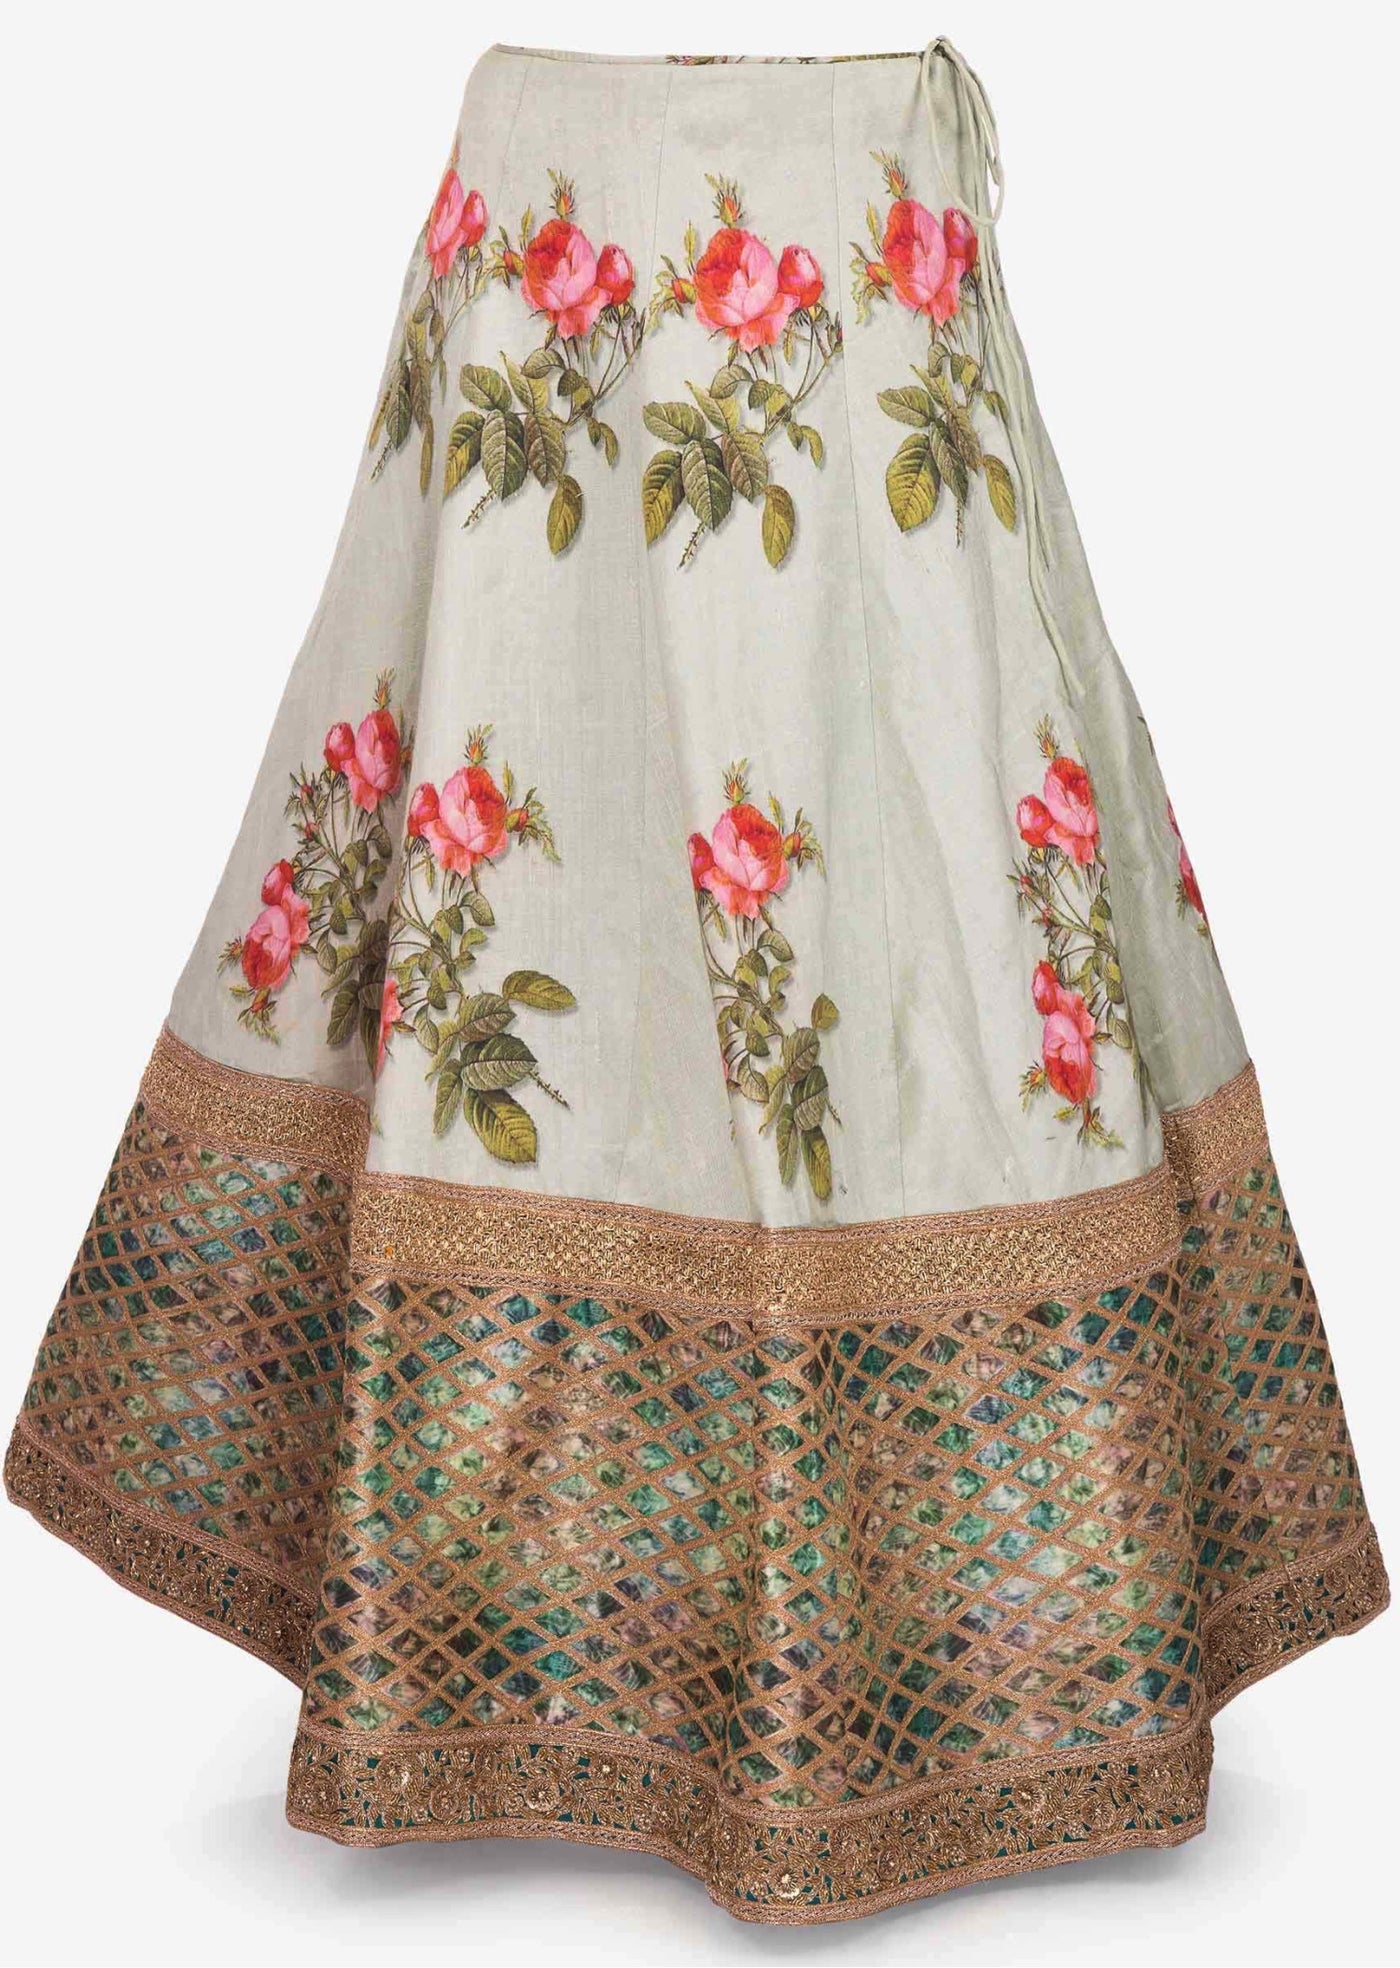 Mint blue lehenga in raw silk - Indian Clothing in Denver, CO, Aurora, CO, Boulder, CO, Fort Collins, CO, Colorado Springs, CO, Parker, CO, Highlands Ranch, CO, Cherry Creek, CO, Centennial, CO, and Longmont, CO. Nationwide shipping USA - India Fashion X